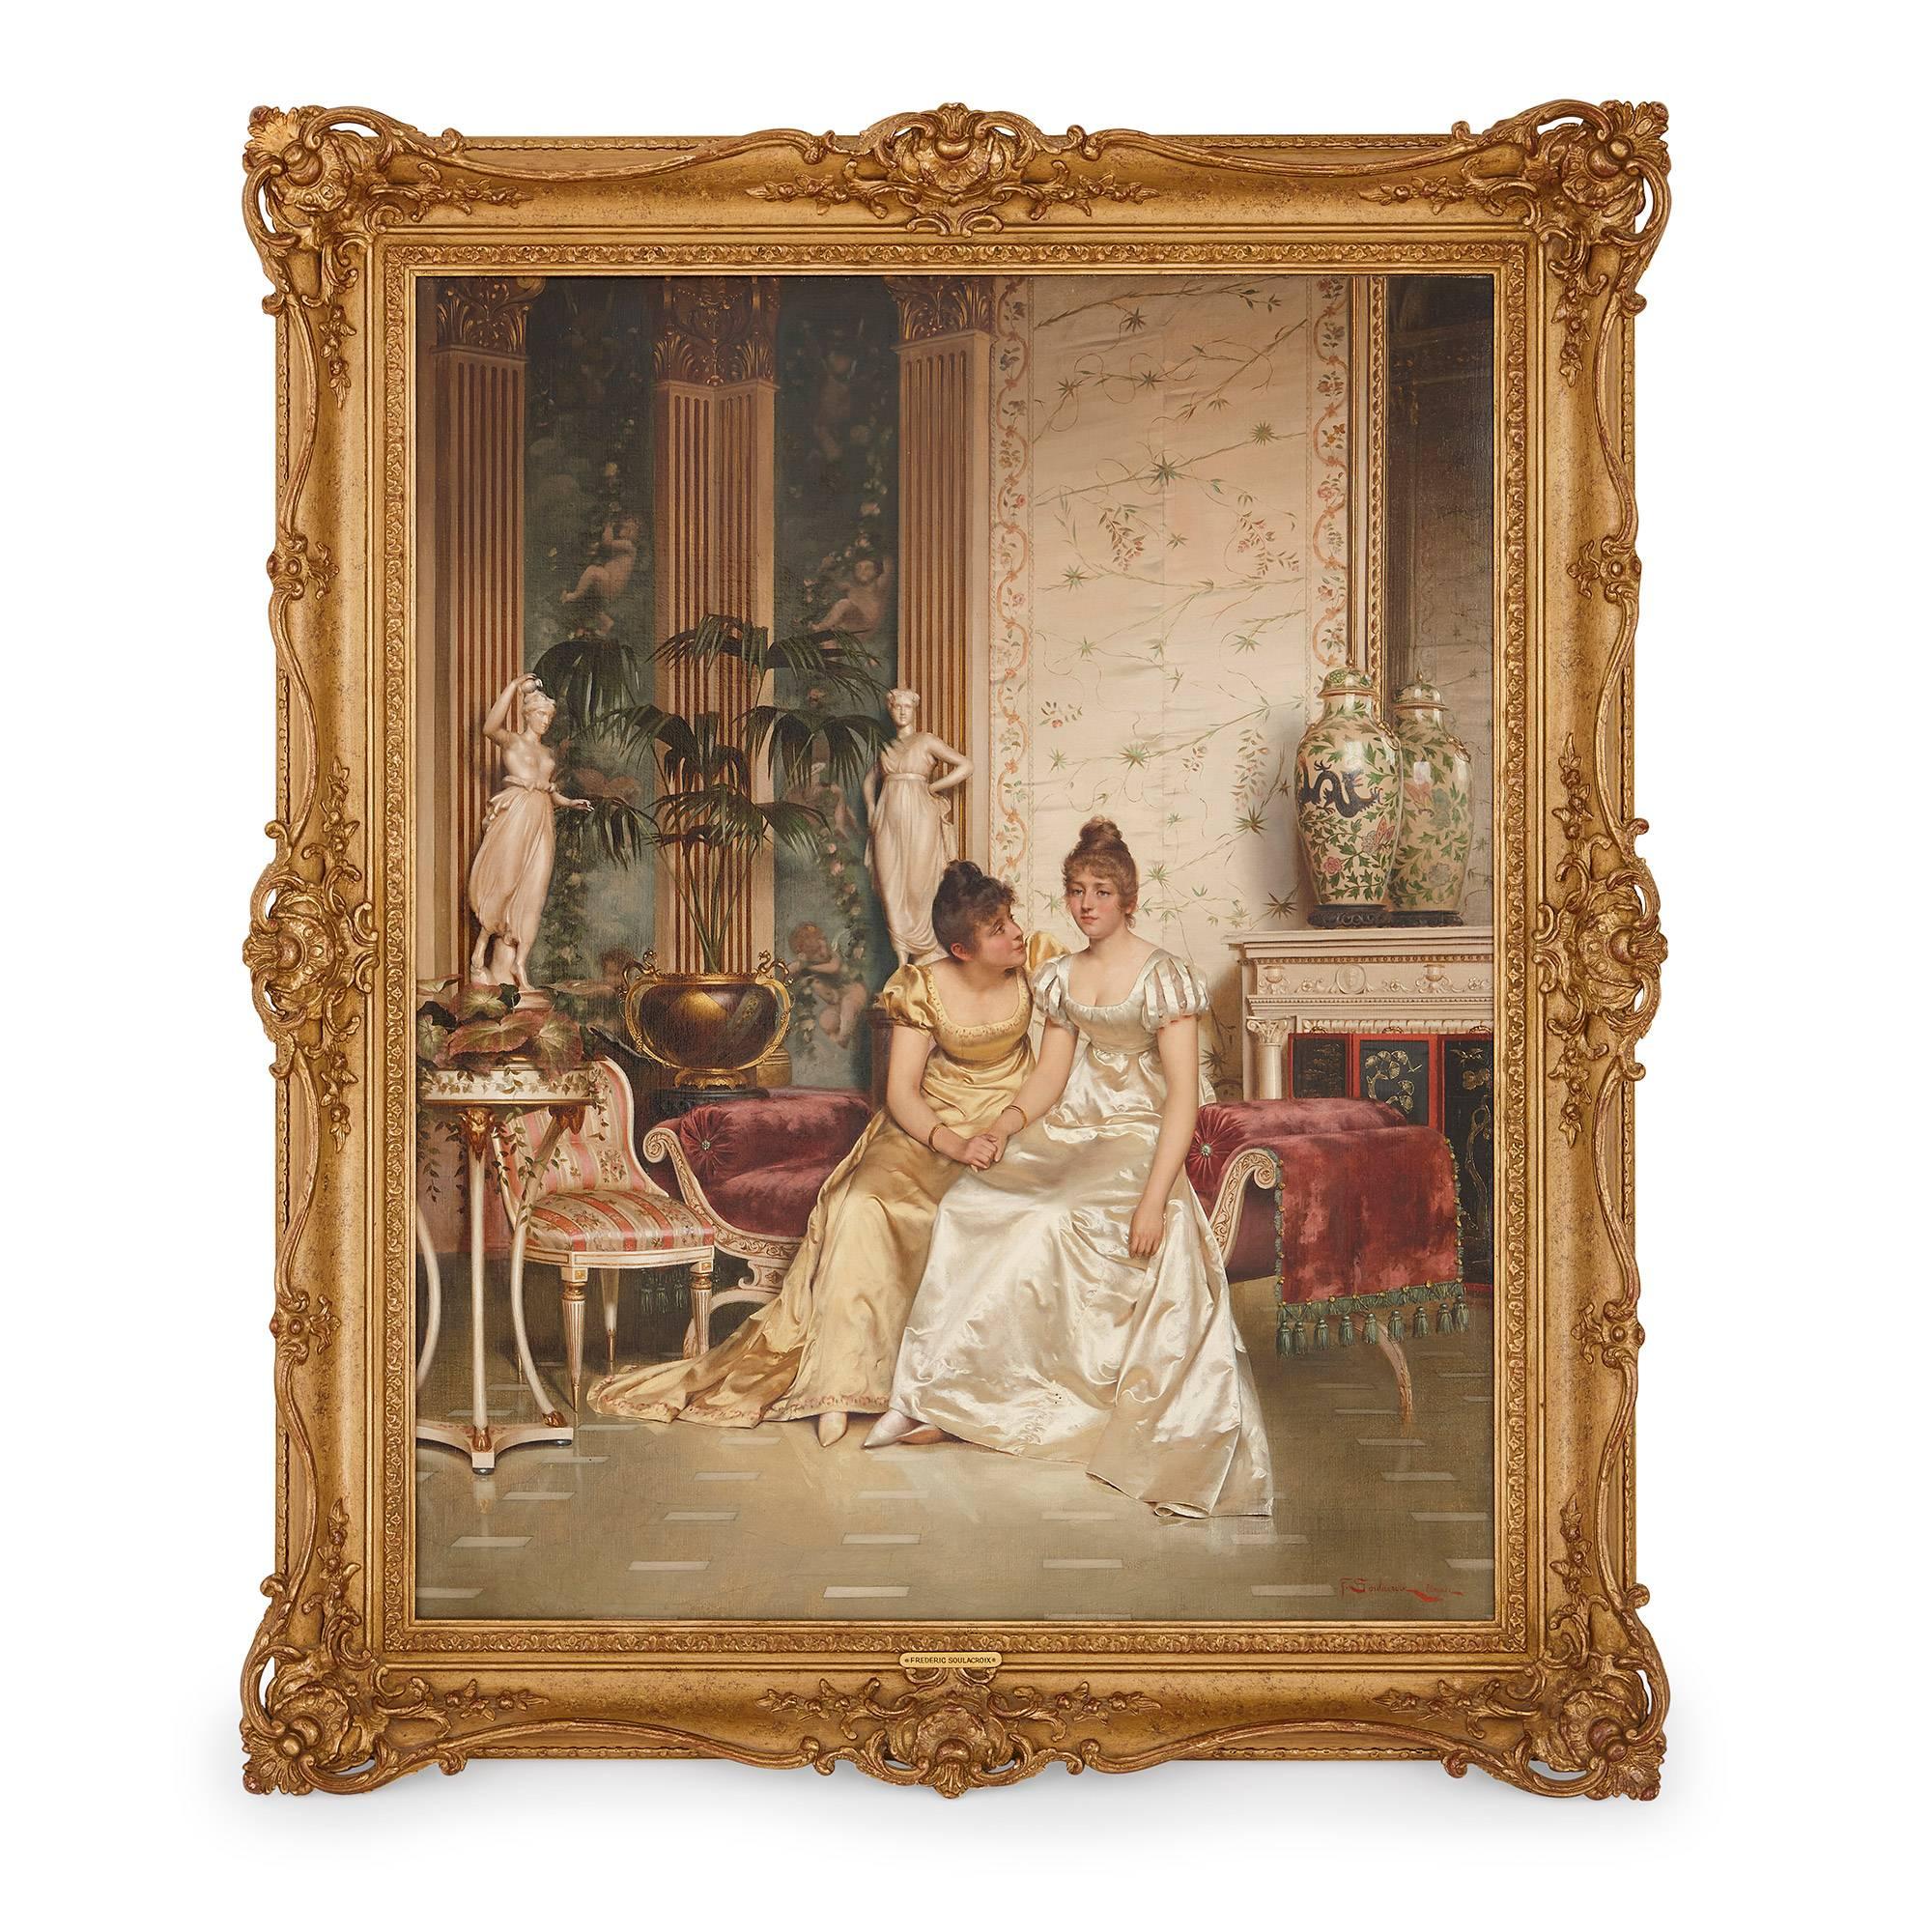 Frédéric Soulacroix Interior Painting - 'A Shared Confidence', 19th Century oil painting in a carved giltwood frame